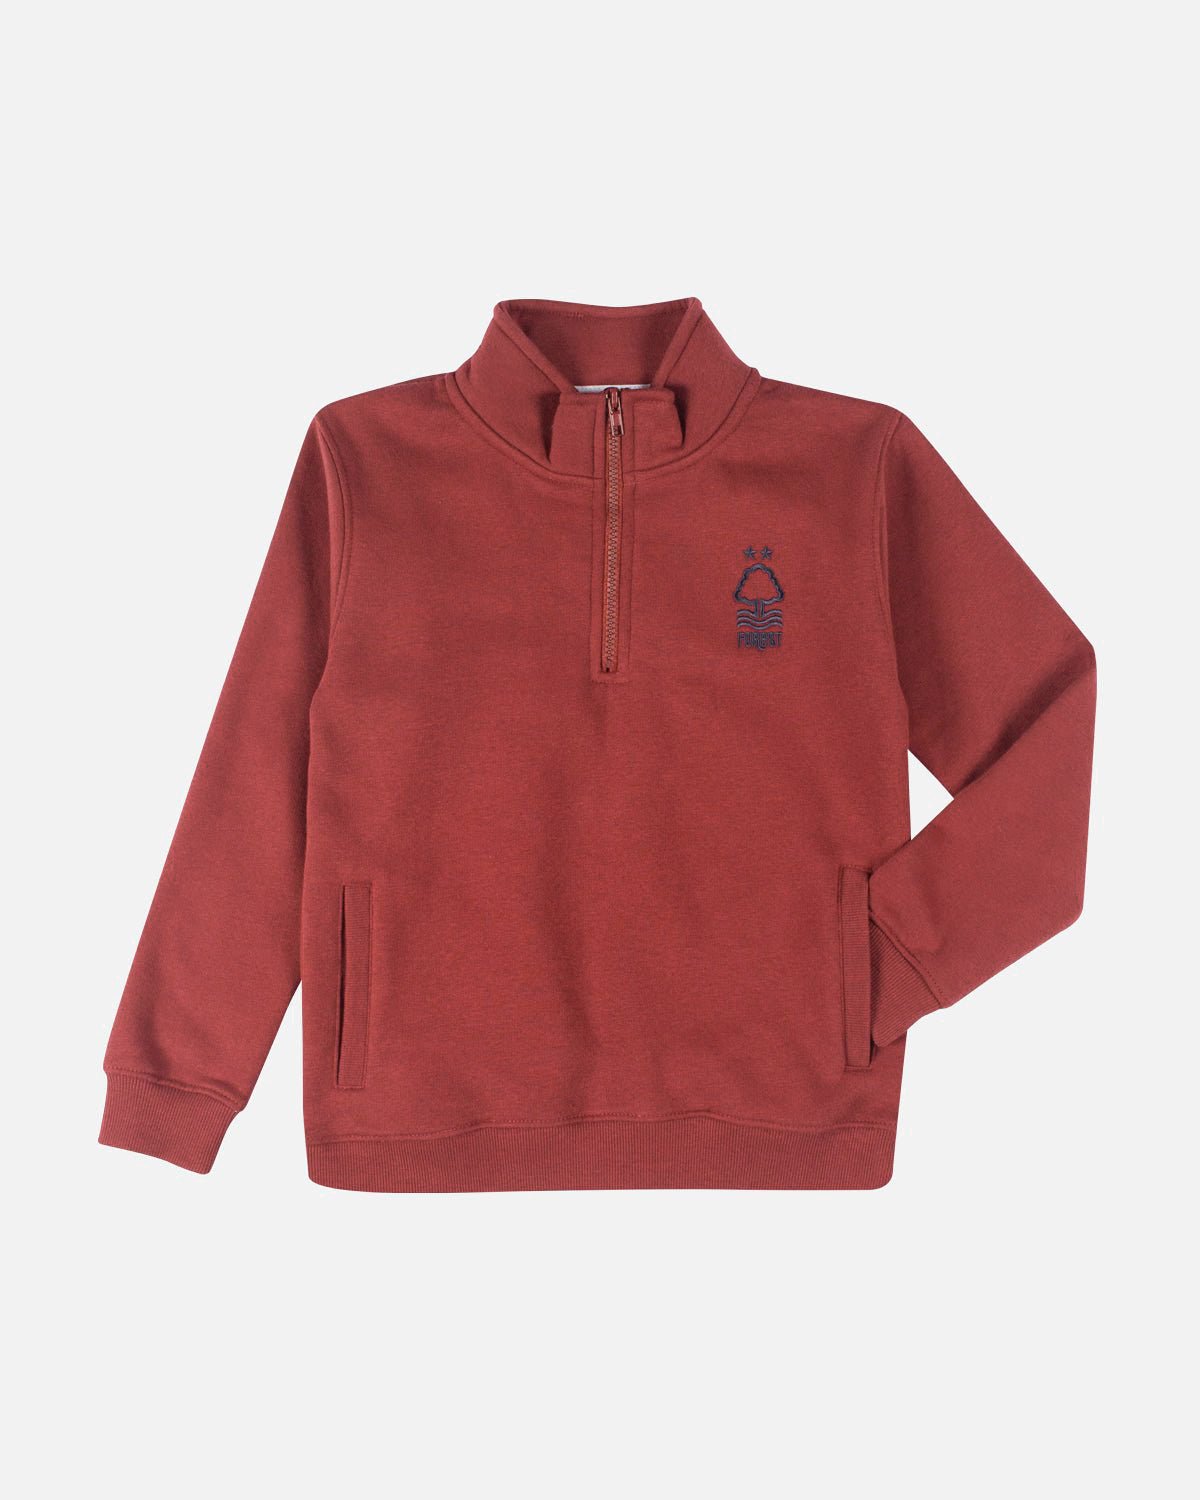 NFFC Junior Red Essential 1/4 Zip Top - Nottingham Forest FC